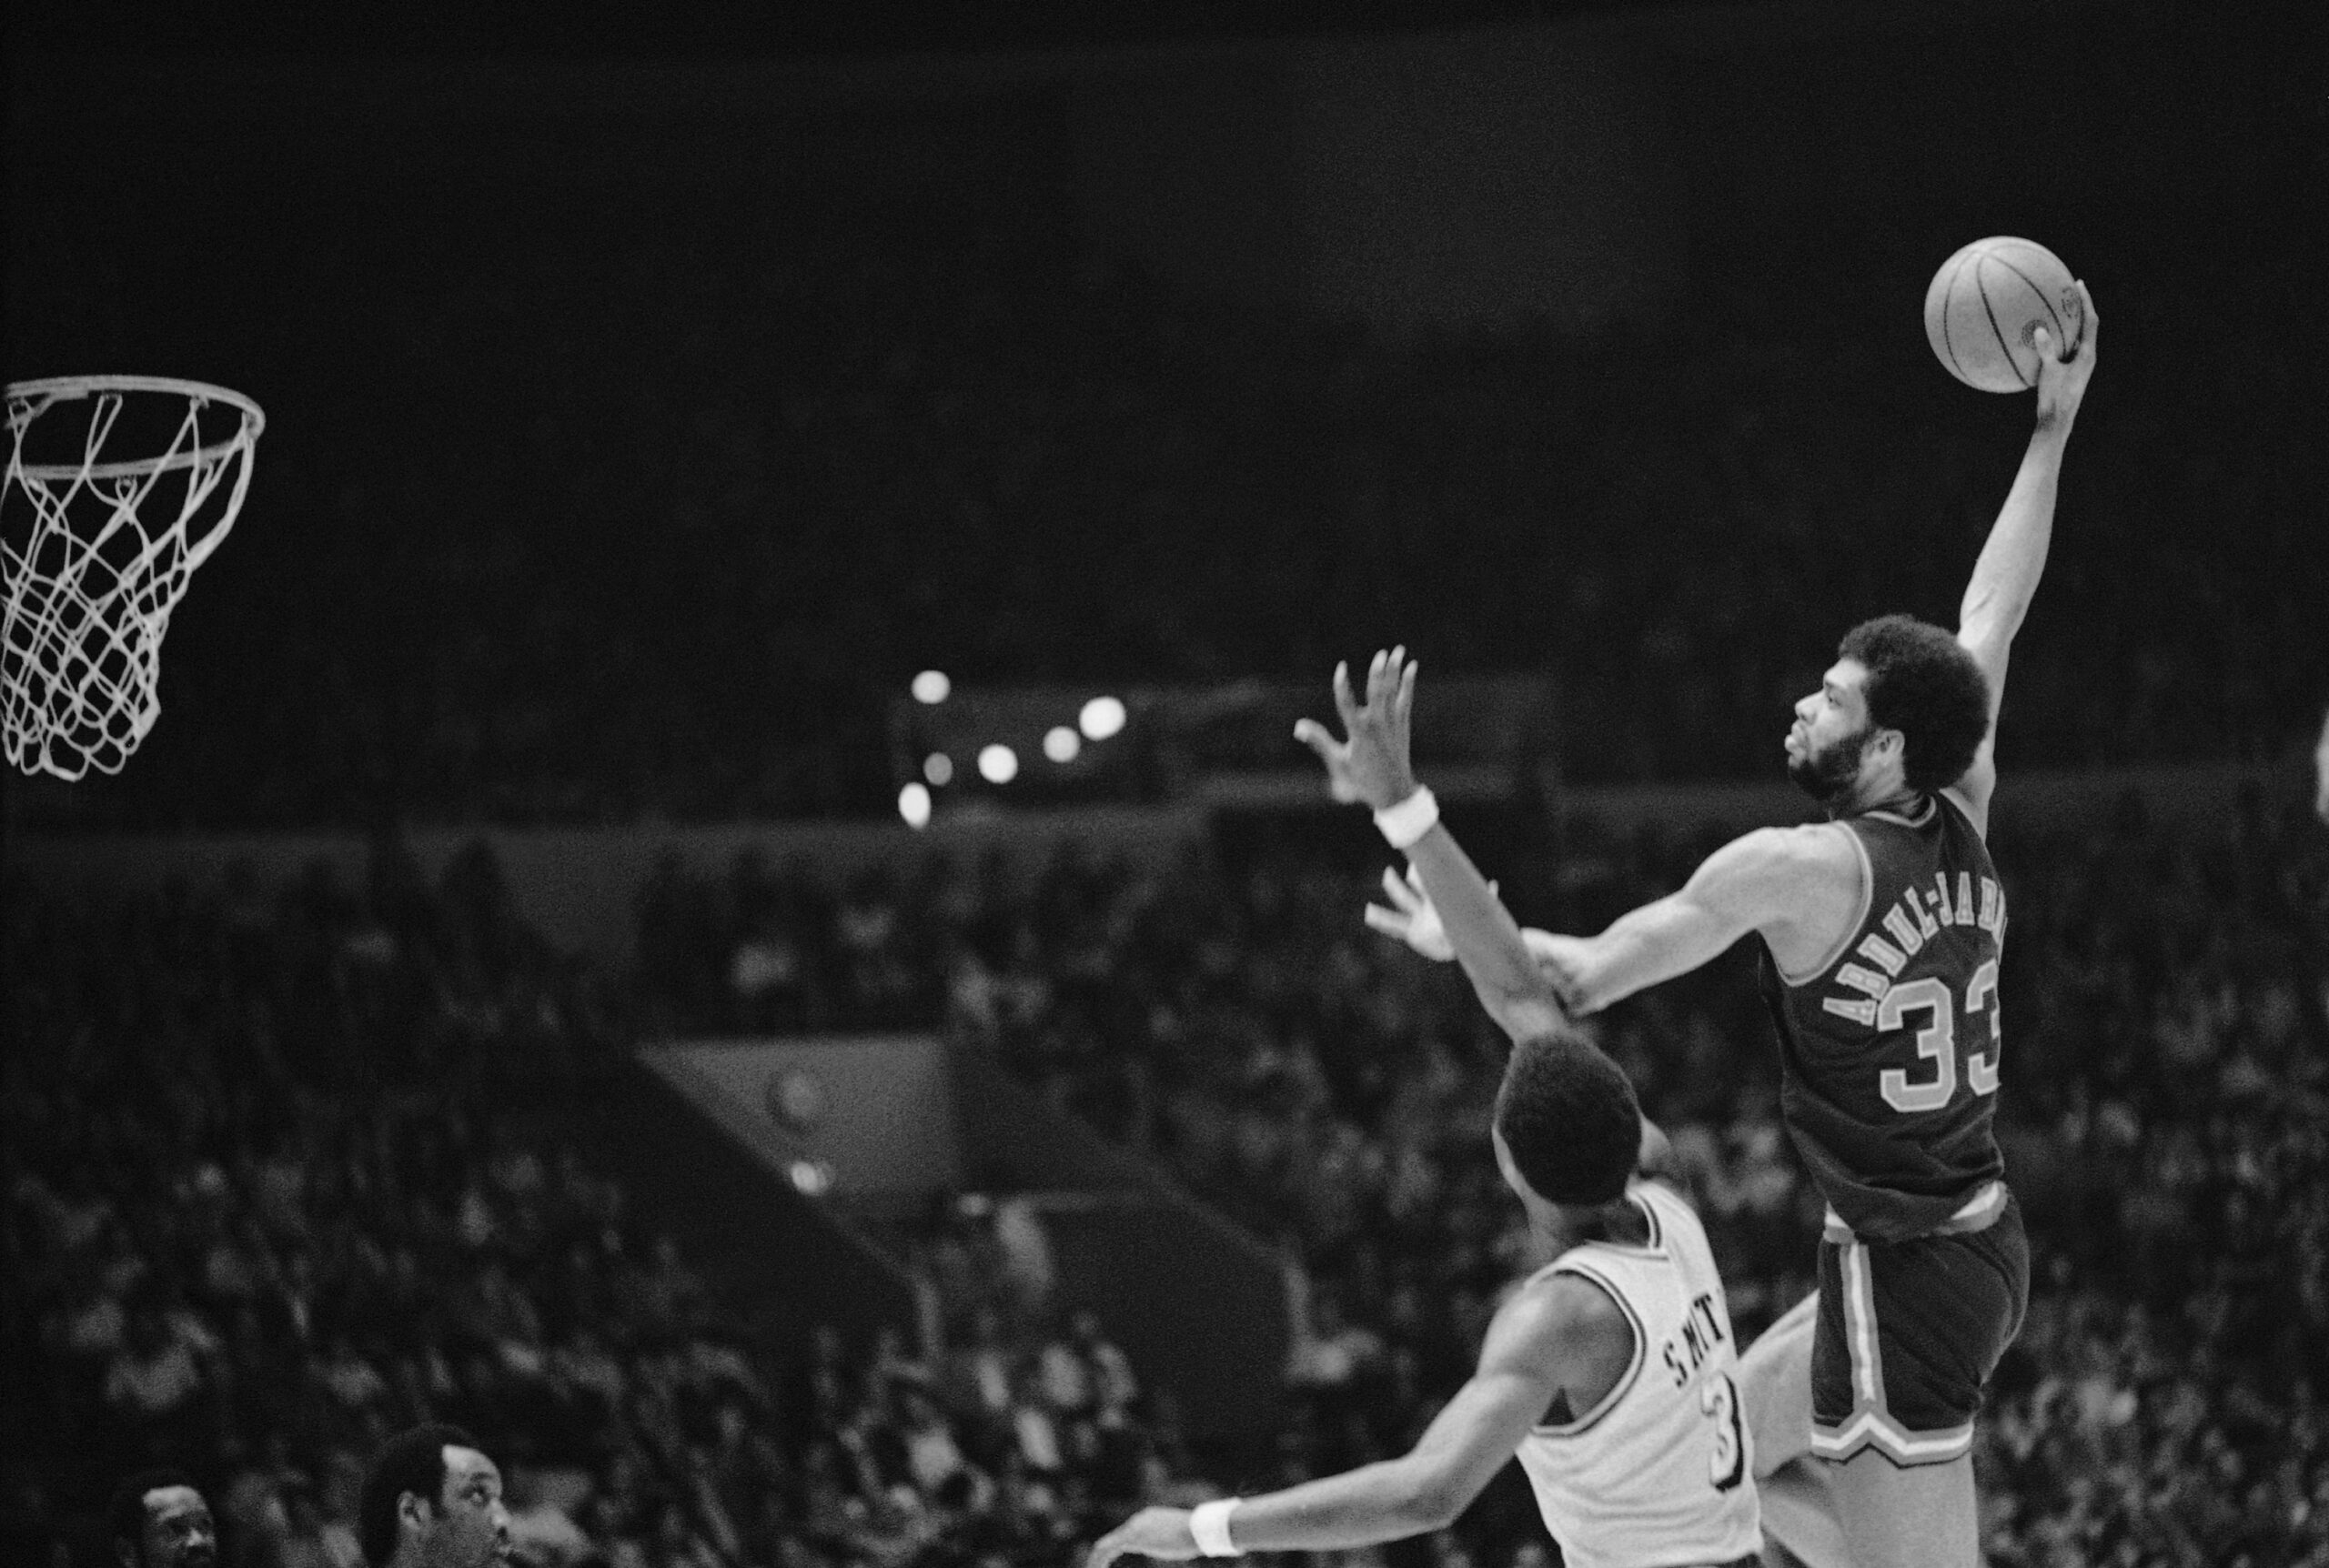 Kareem Abdul-Jabbar shows the form on his hook shot that the Los Angeles Lakers couldn't stop